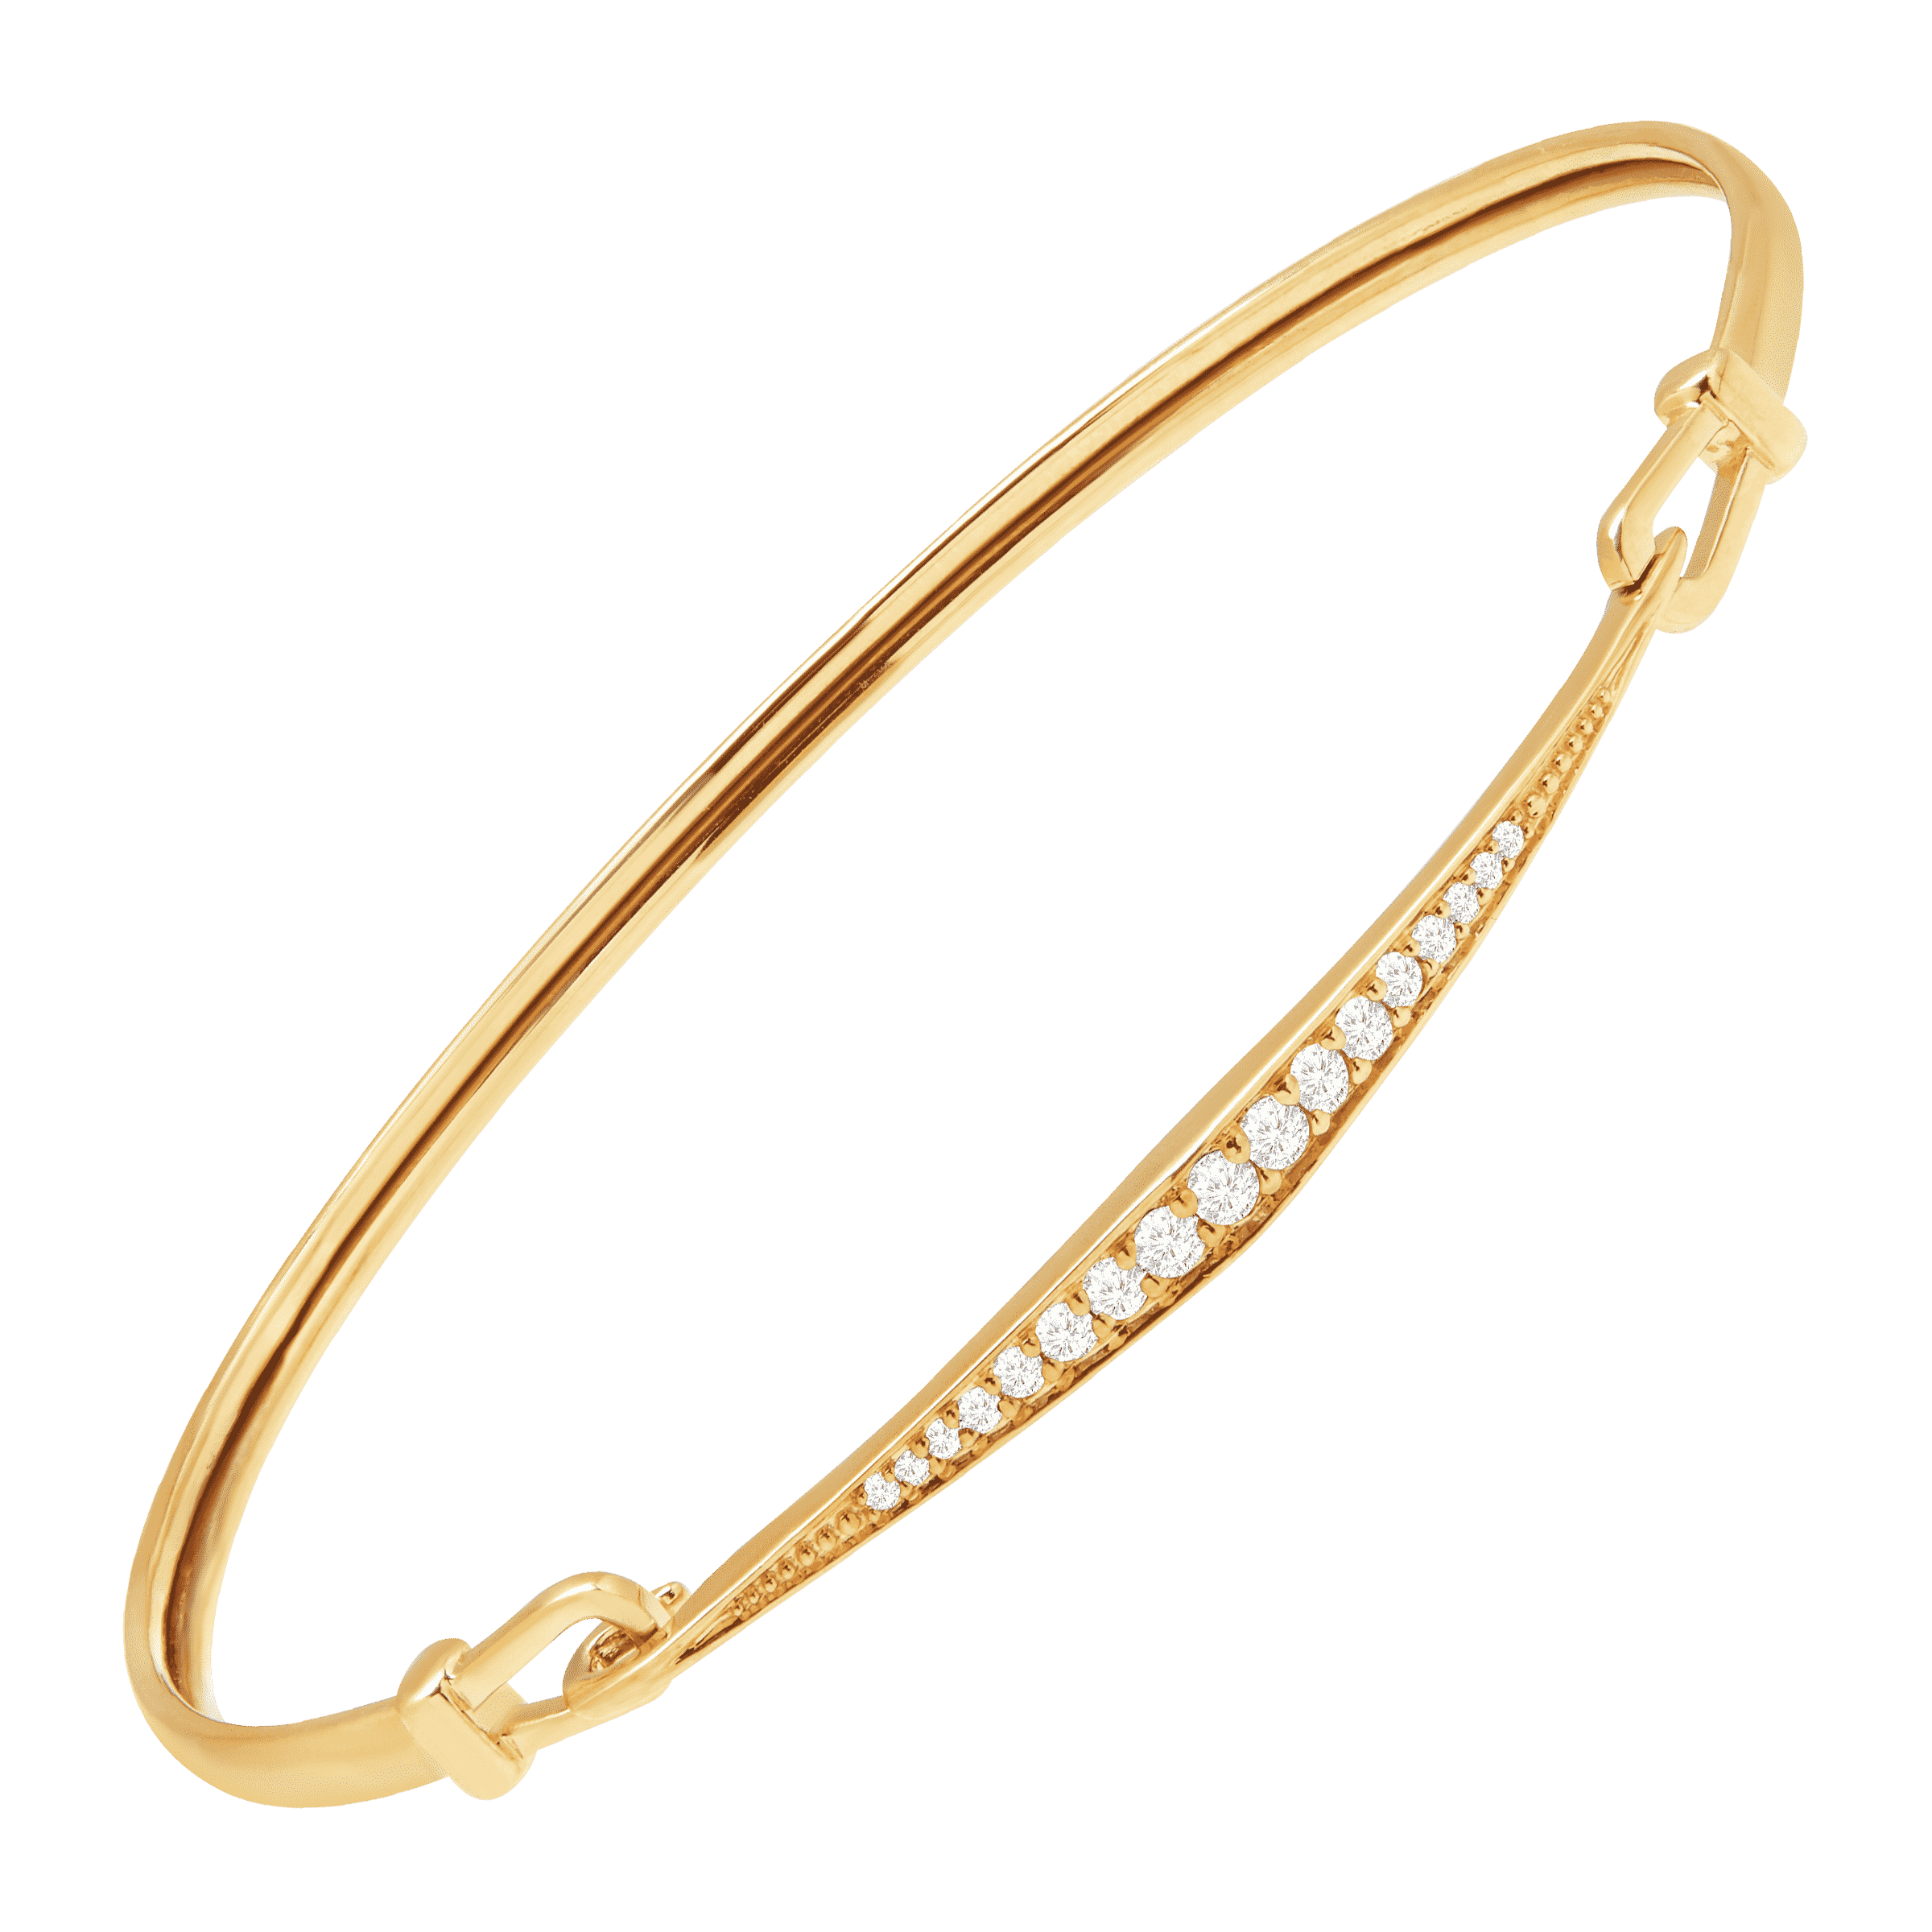 Pre-owned Welry 1/5 Cttw Diamond Hinged Bangle Bracelet In 14k Yellow Gold, 6.75" In White